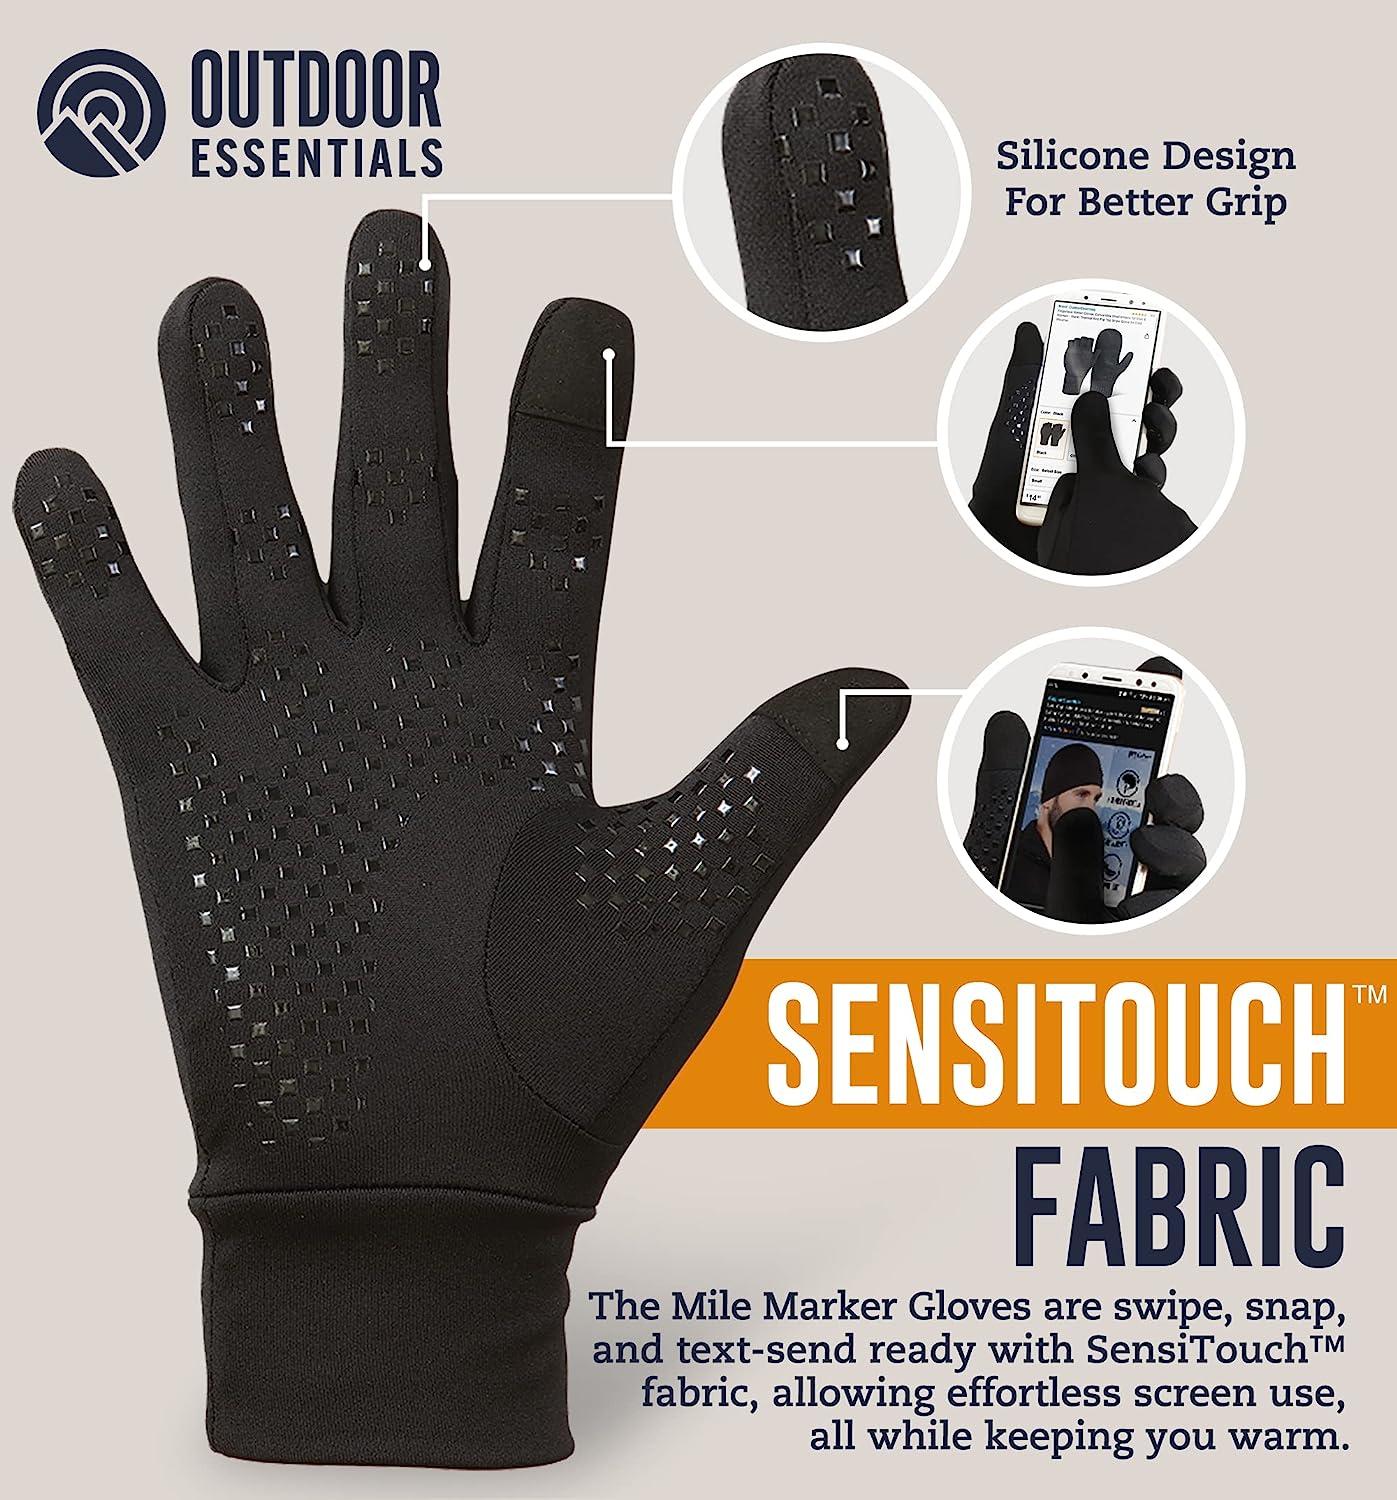 Touch Screen Running Gloves - Thermal Winter Glove Liners for Cold Weather  for Men & Women - Thin, Lightweight & Warm Gloves for Texting